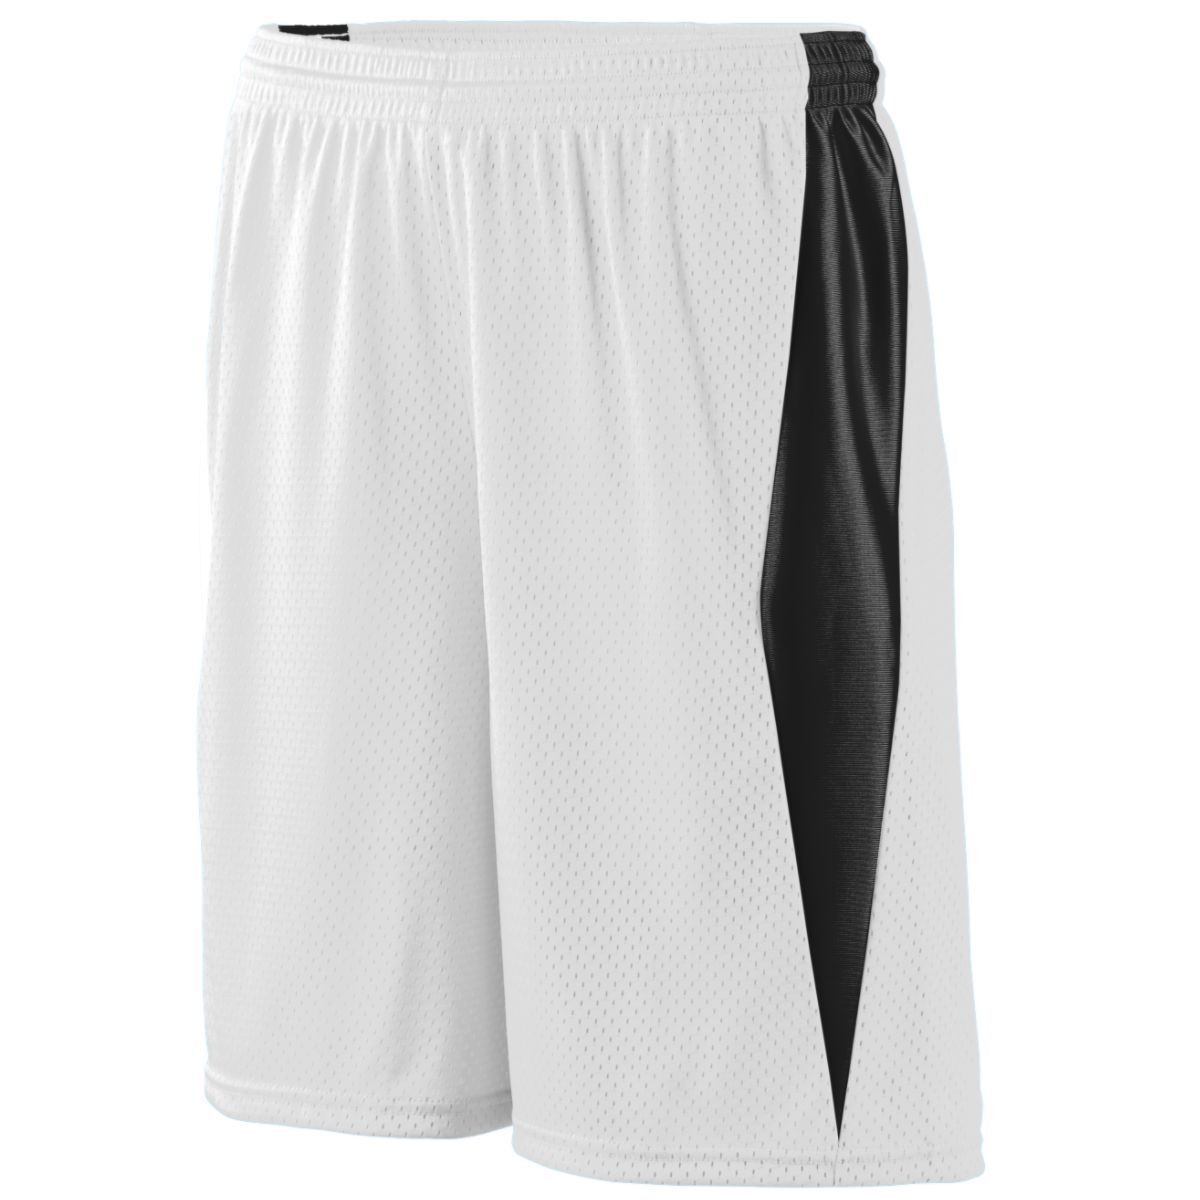 Augusta Sportswear Youth Top Score Shorts in White/Black  -Part of the Youth, Augusta-Products, Lacrosse, Shirts, All-Sports, All-Sports-1 product lines at KanaleyCreations.com